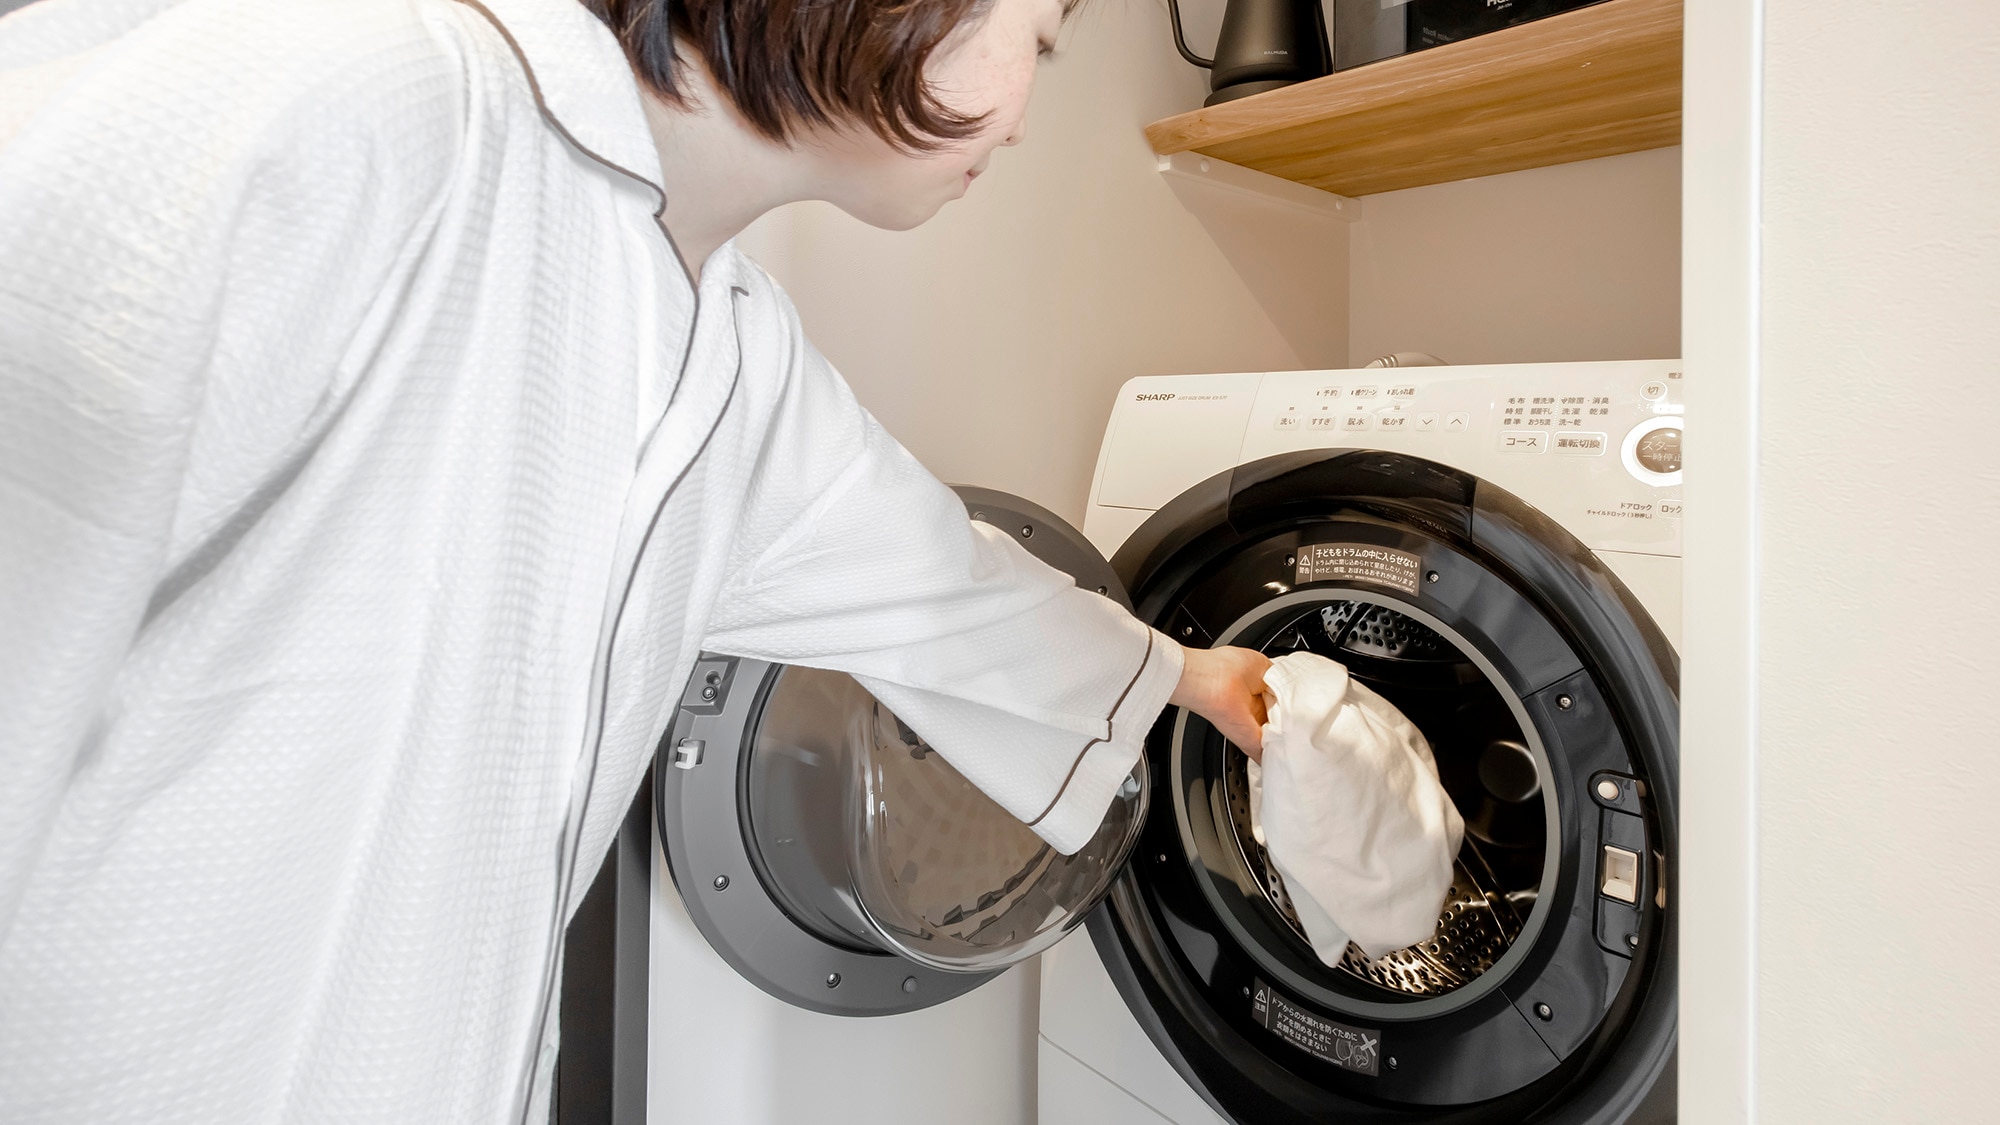 ■Comfort Double/Washer/Dryer (Usage image)